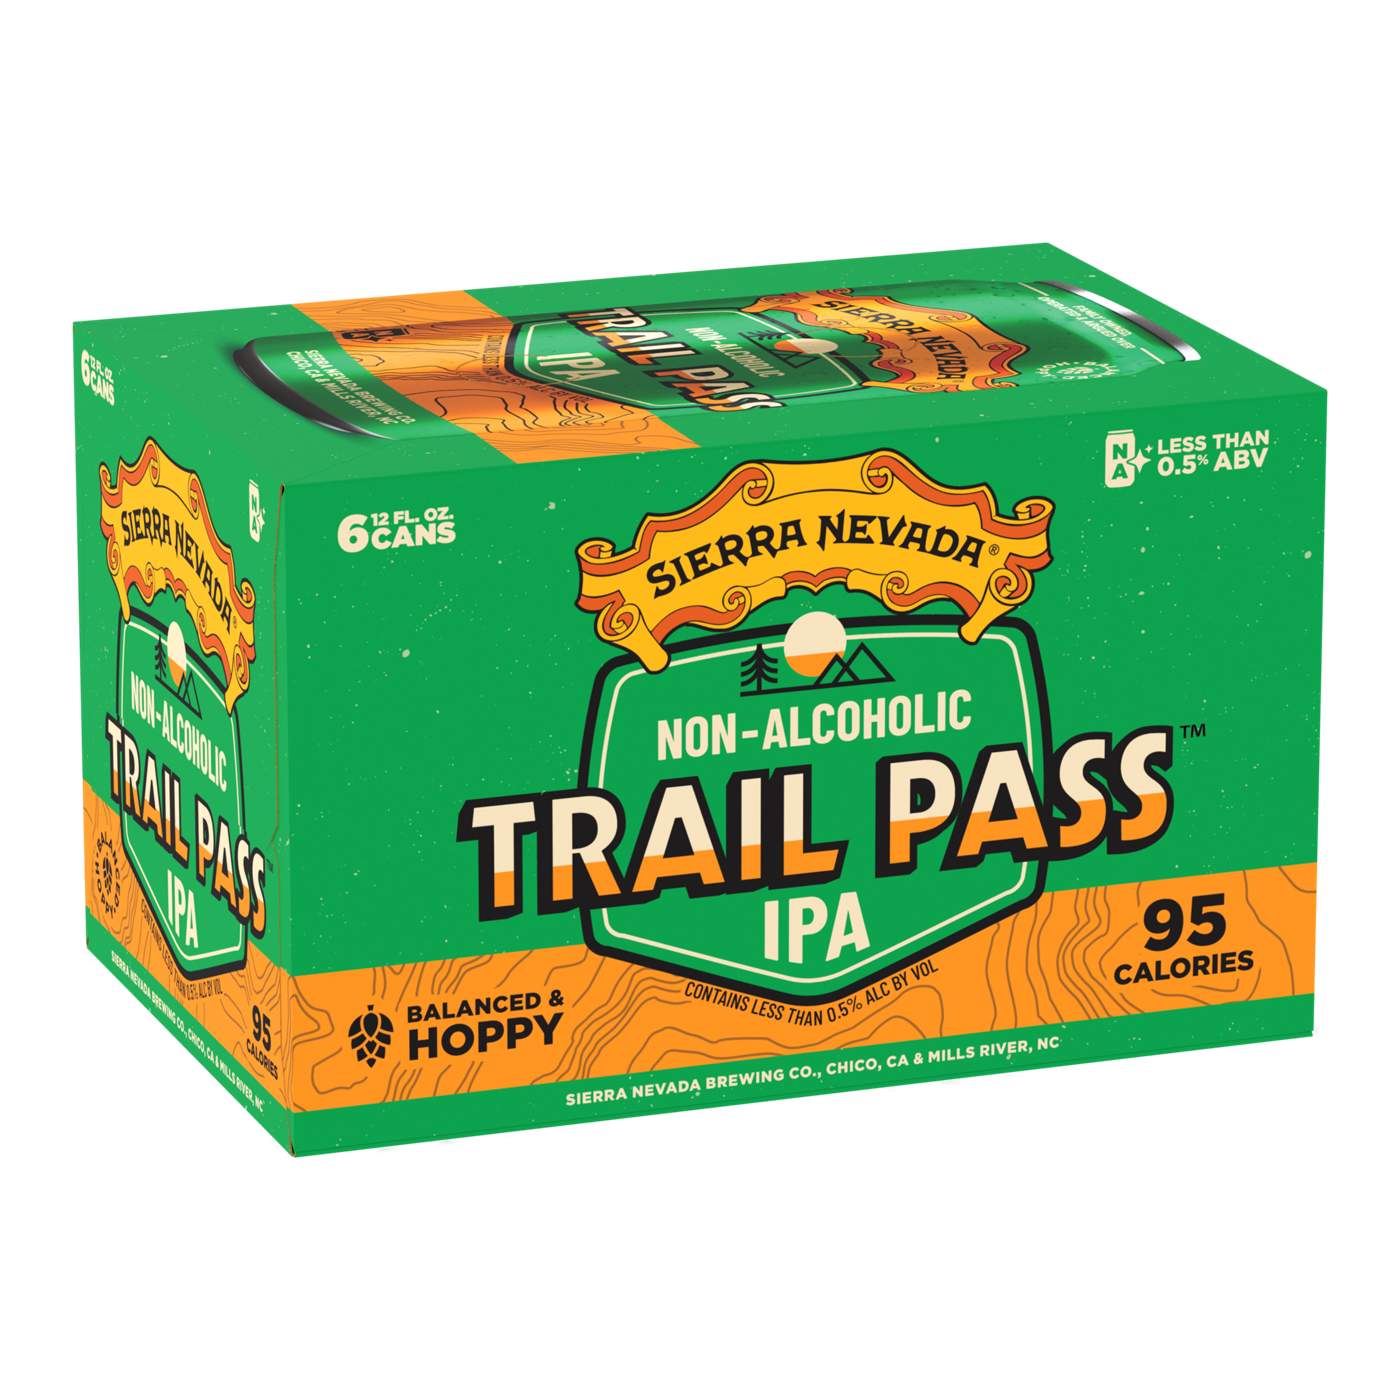 Sierra Nevada Trail Pass Non Alcoholic IPA 6 pk Cans; image 1 of 5